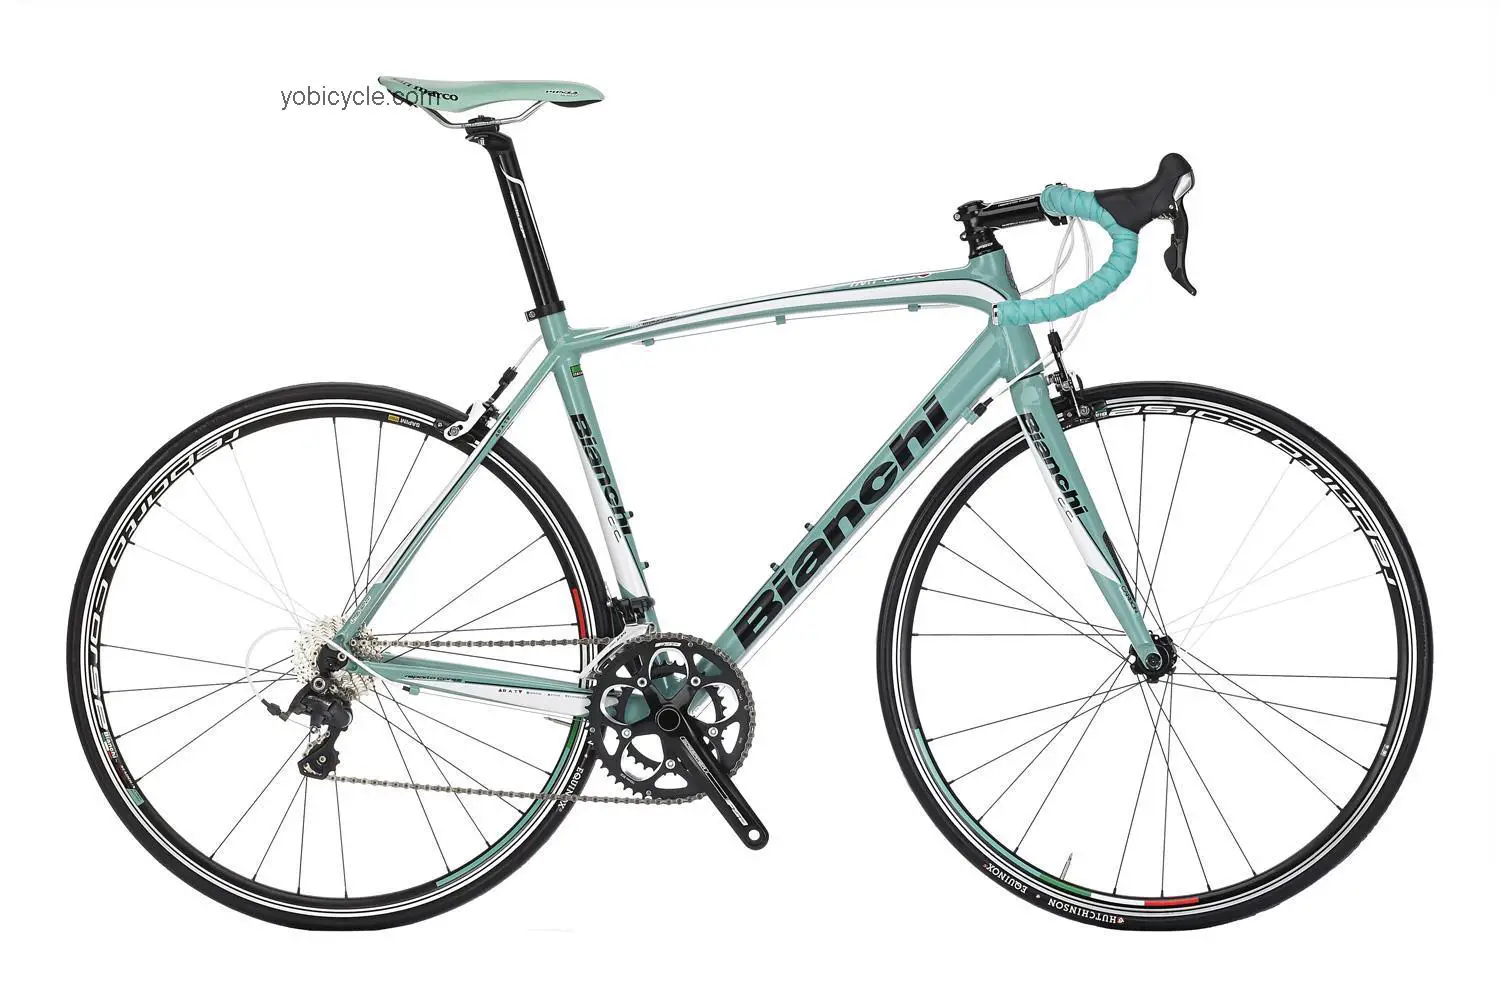 Bianchi  Impulso Ultegra Technical data and specifications